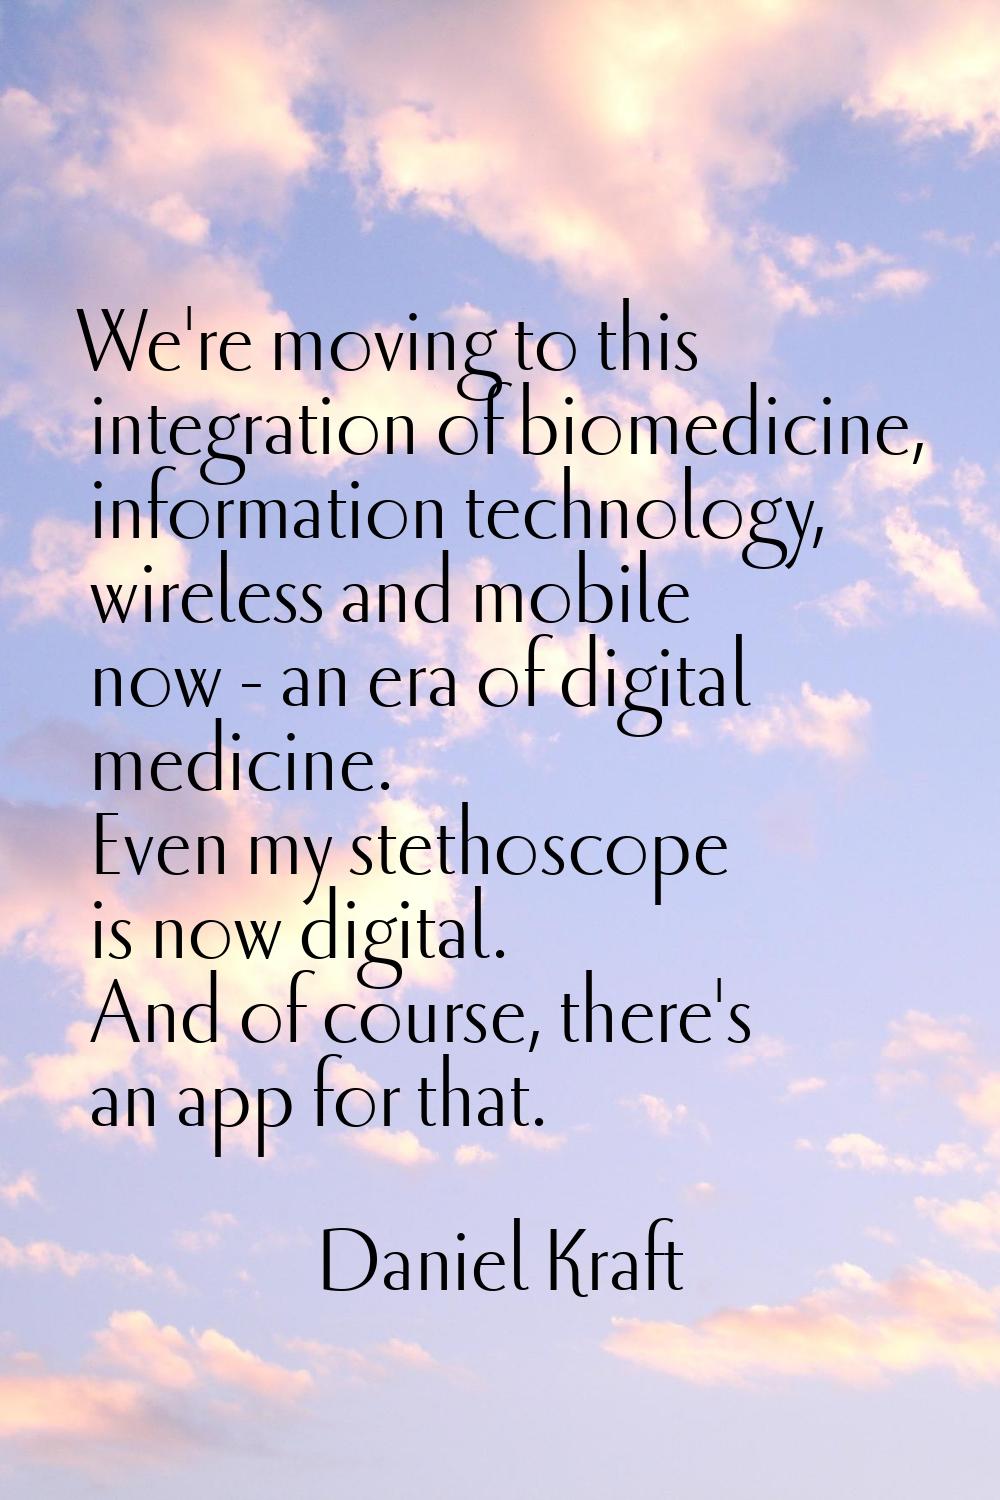 We're moving to this integration of biomedicine, information technology, wireless and mobile now - 